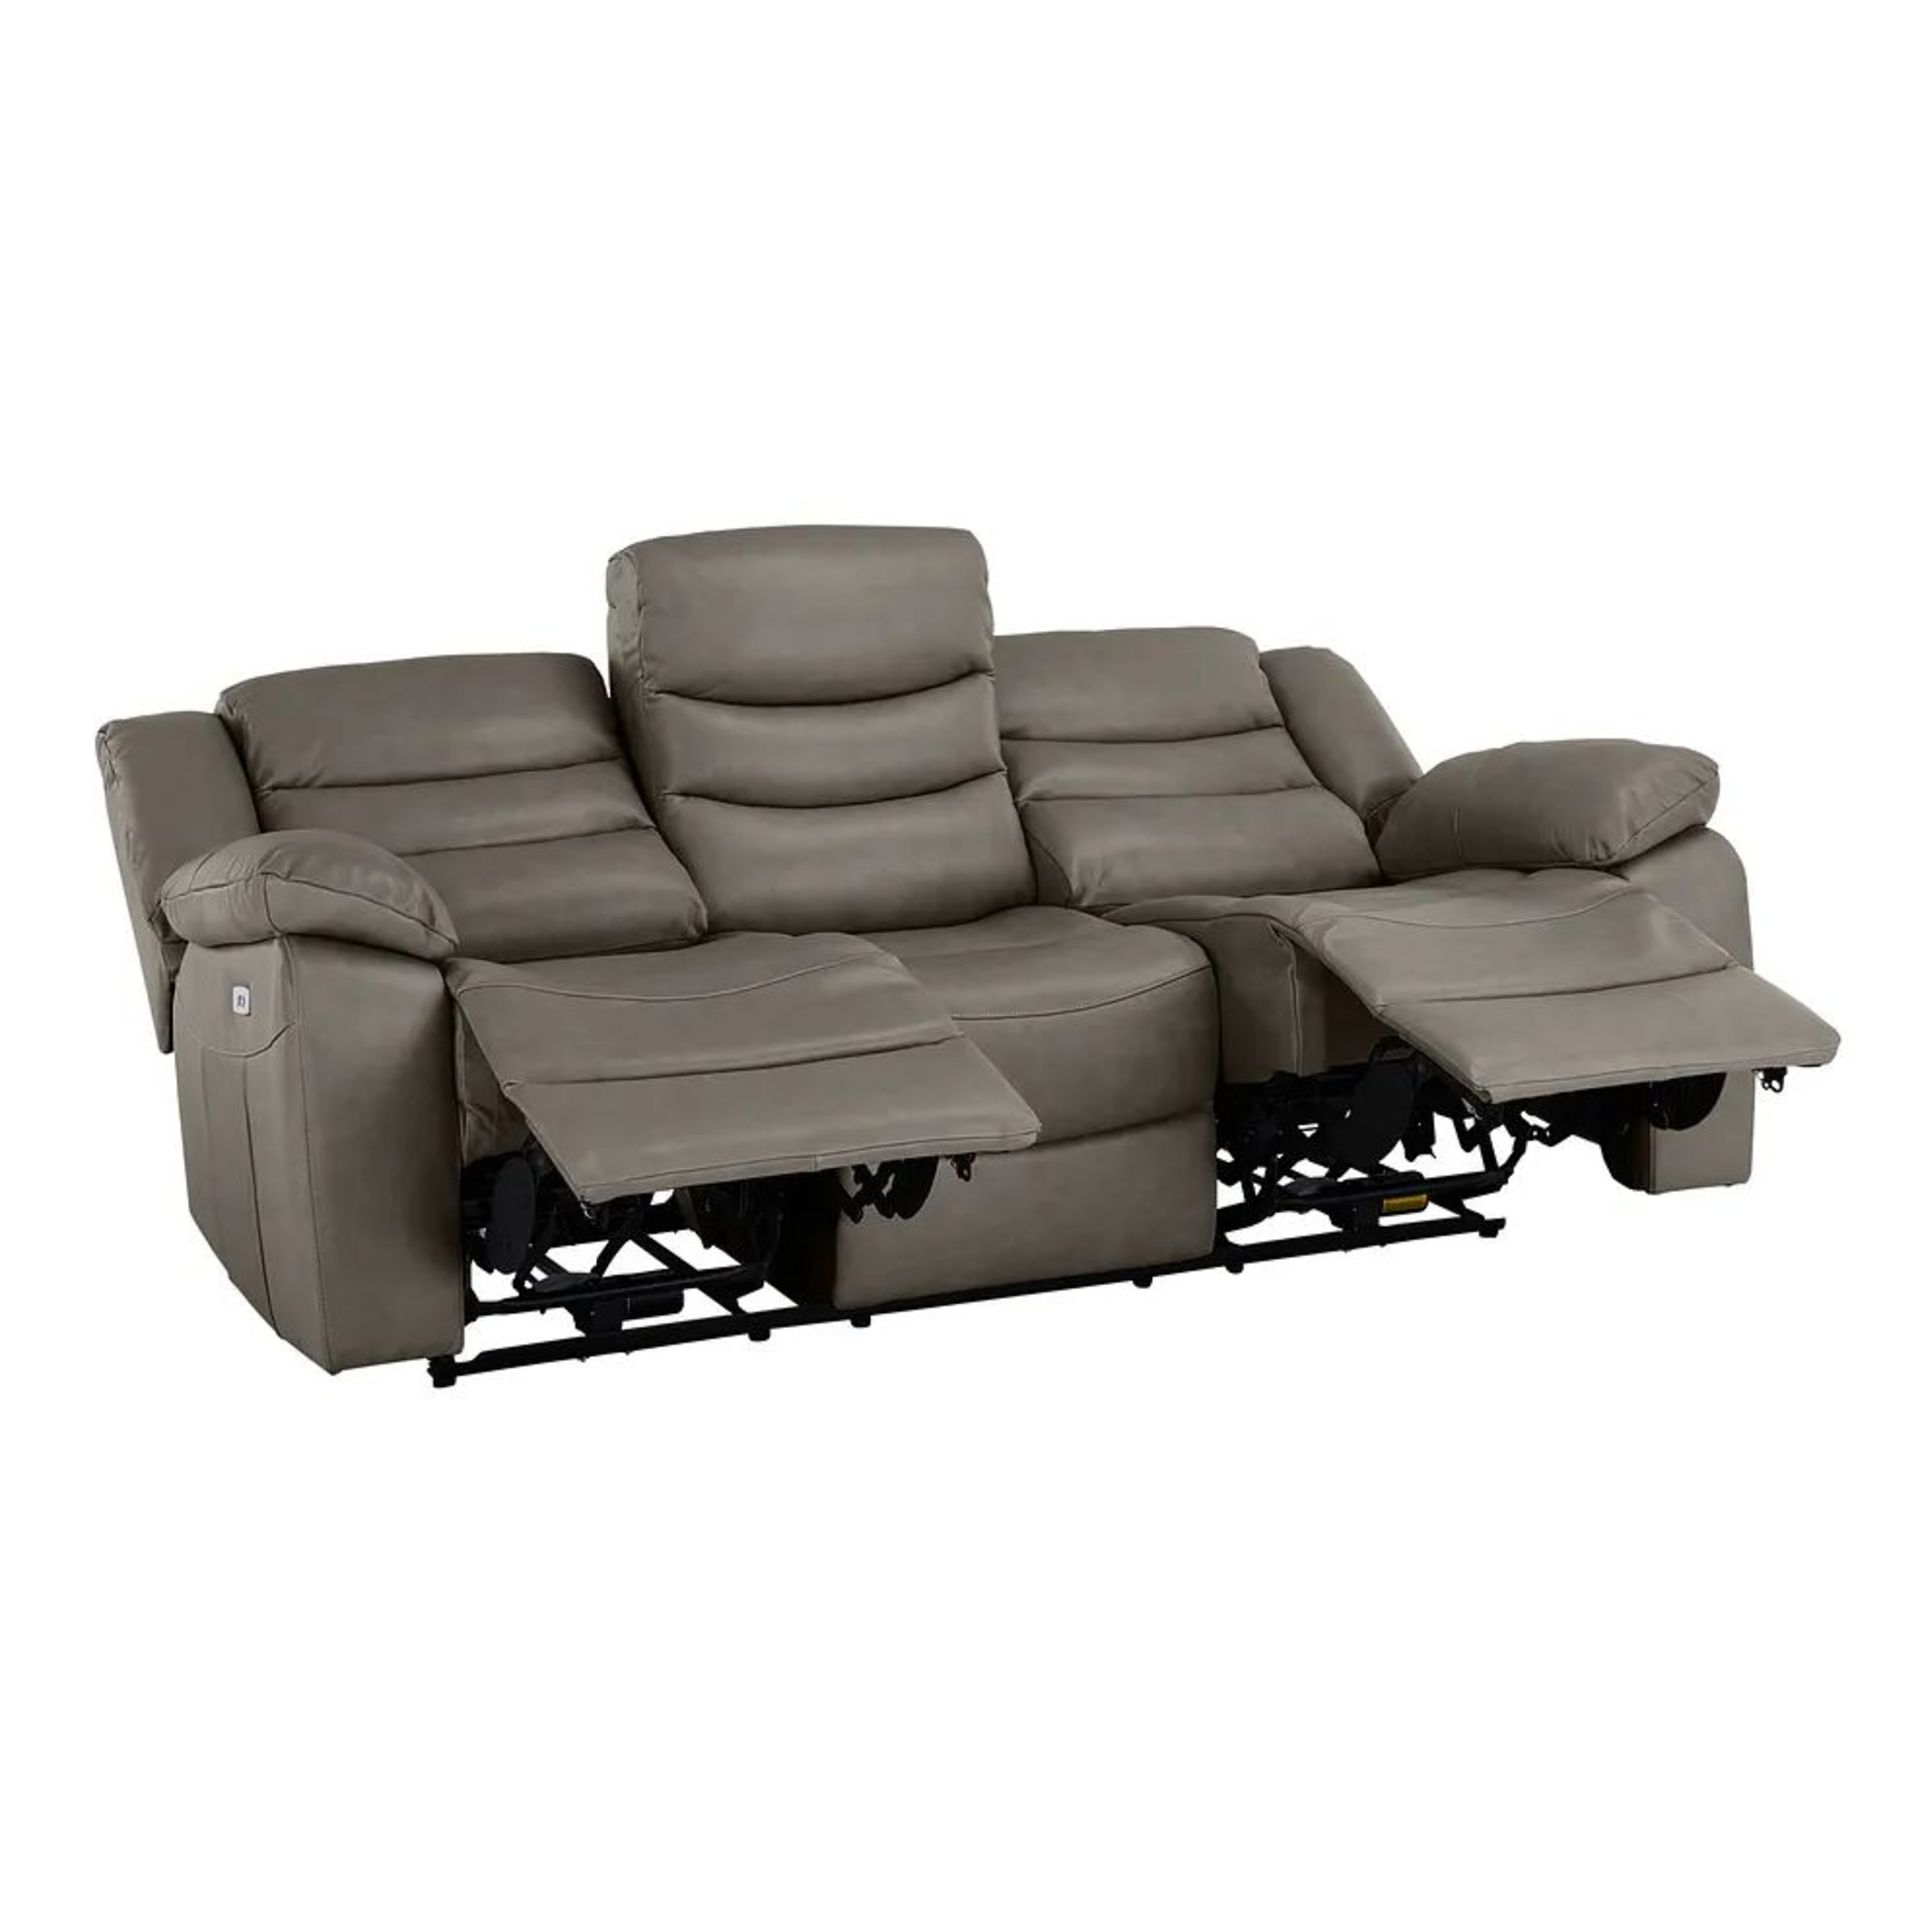 BRAND NEW MARLOW 3 Seater Electric Recliner Sofa - DARK GREY LEATHER. RRP £1849. Our Marlow - Image 5 of 11